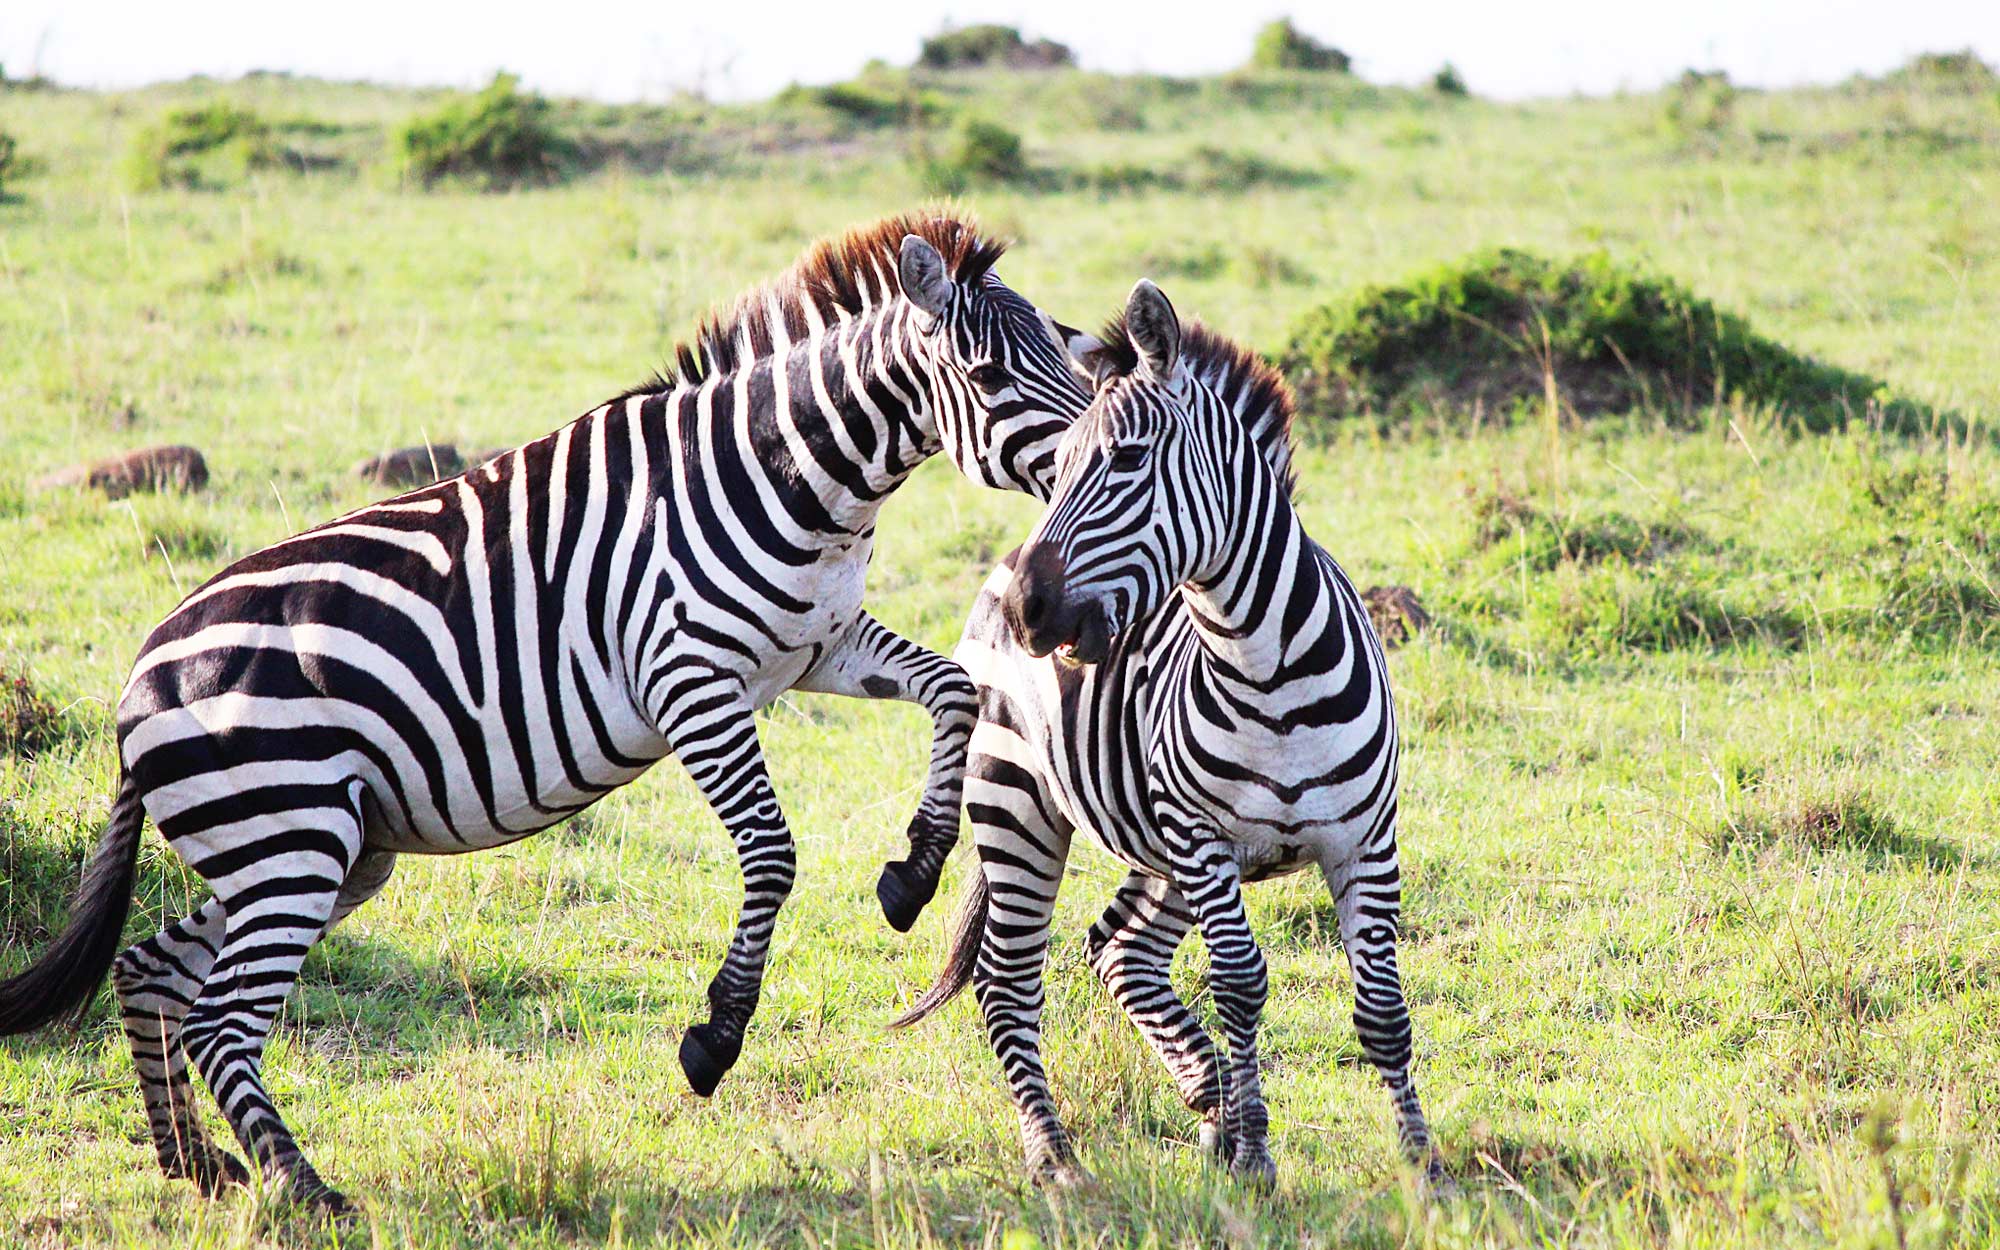 Zebras Playing in the plains, Tanzania